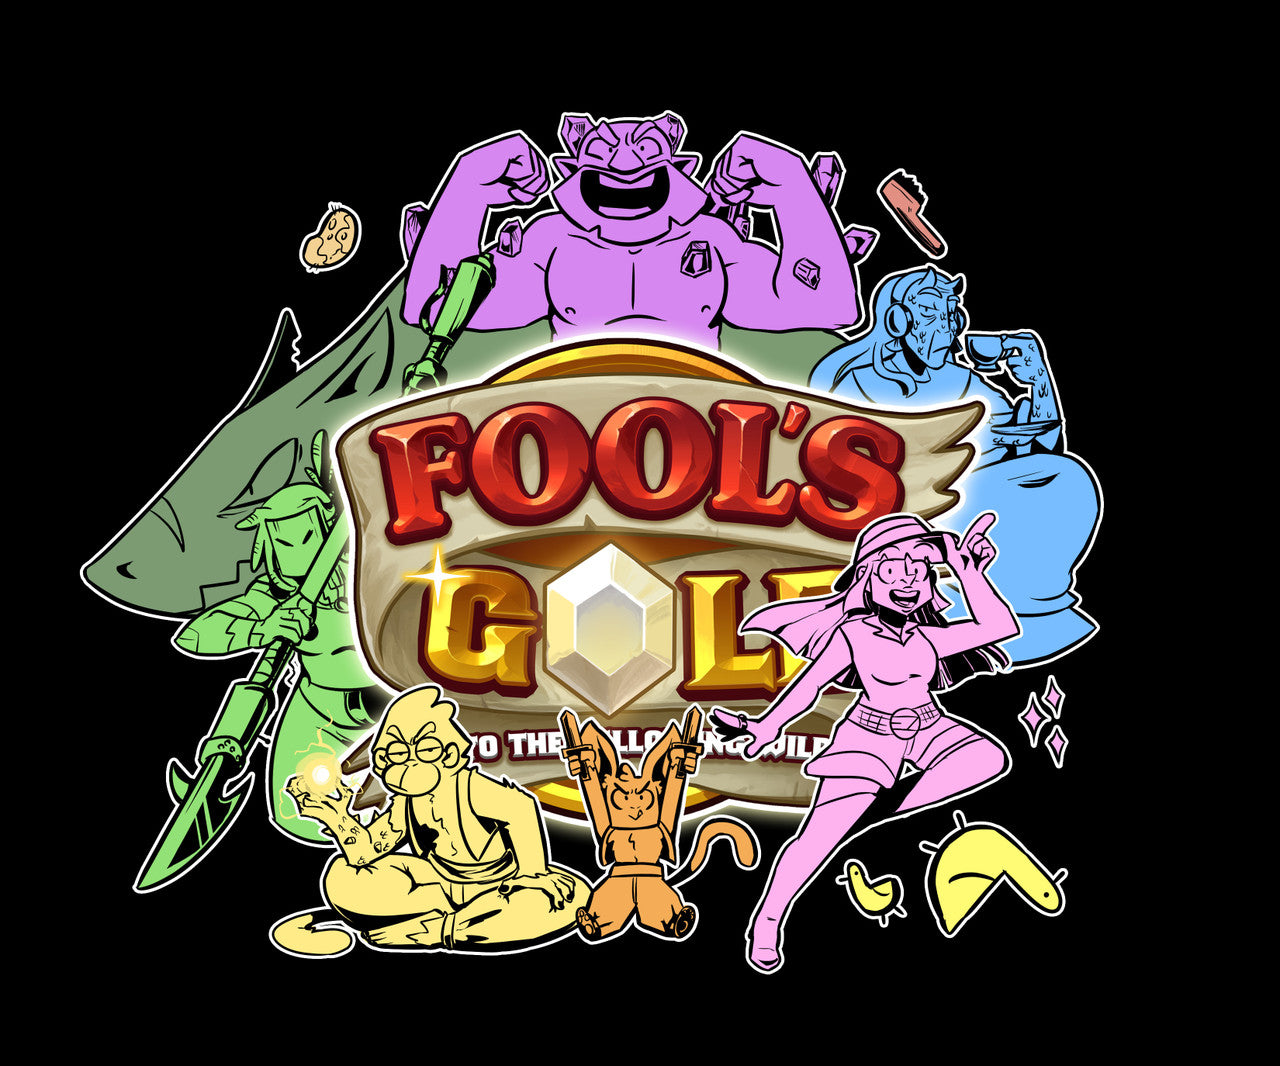 Fool's Gold T-Shirt - The Fool's Gold Crew!